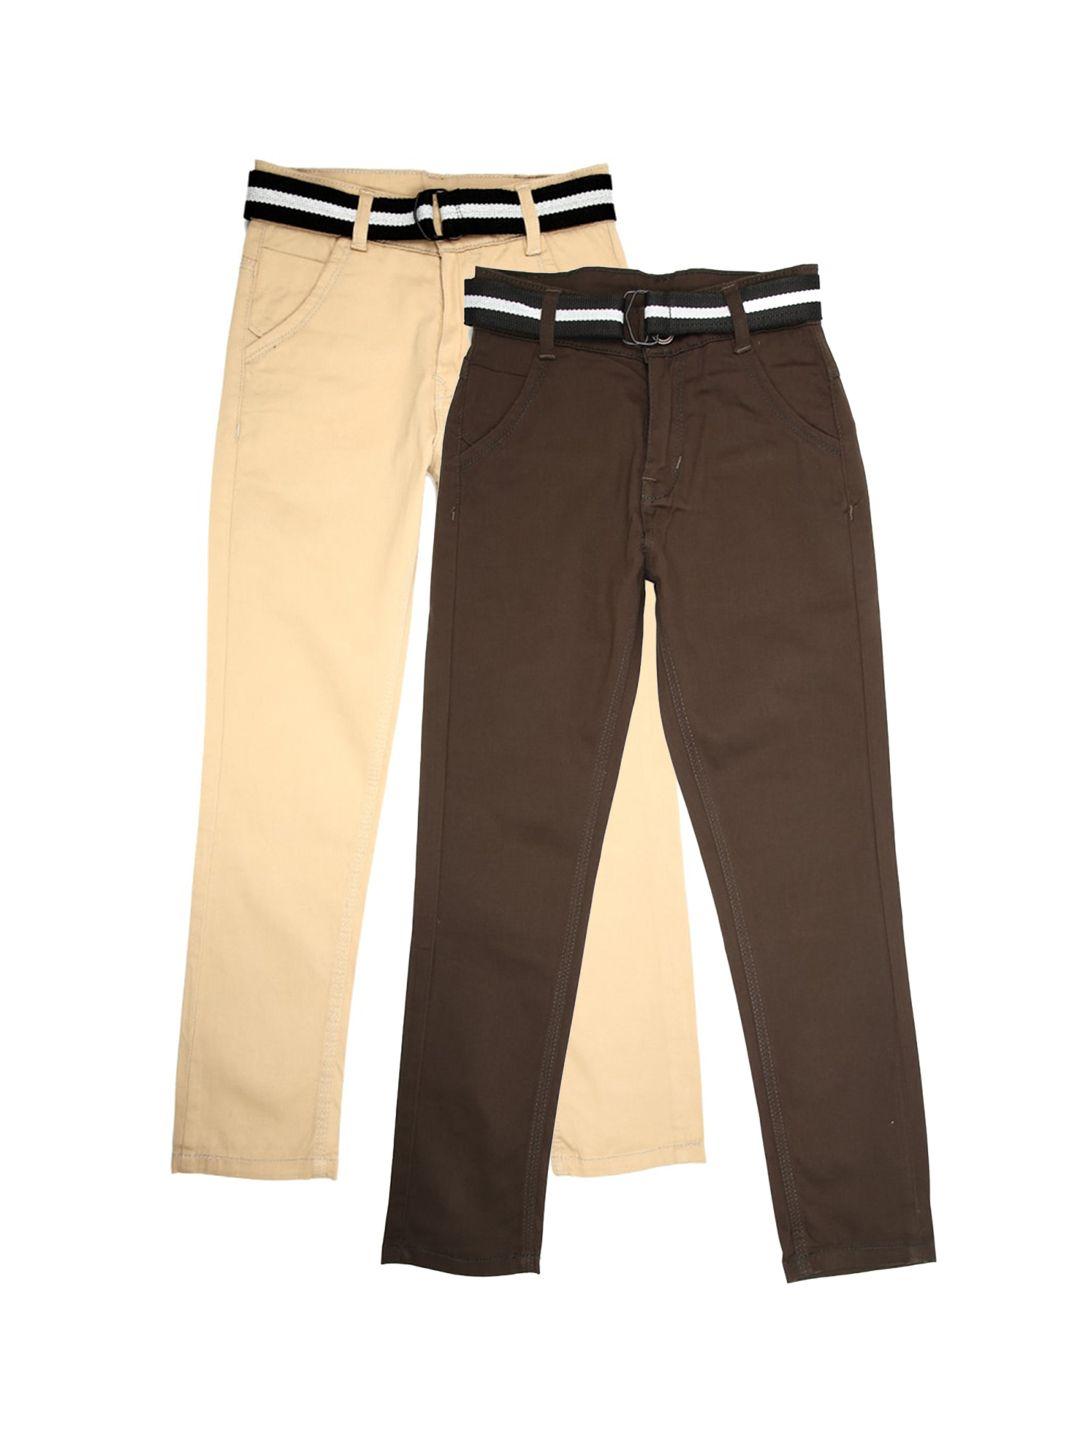 v-mart boys pack of 2 cotton chinos